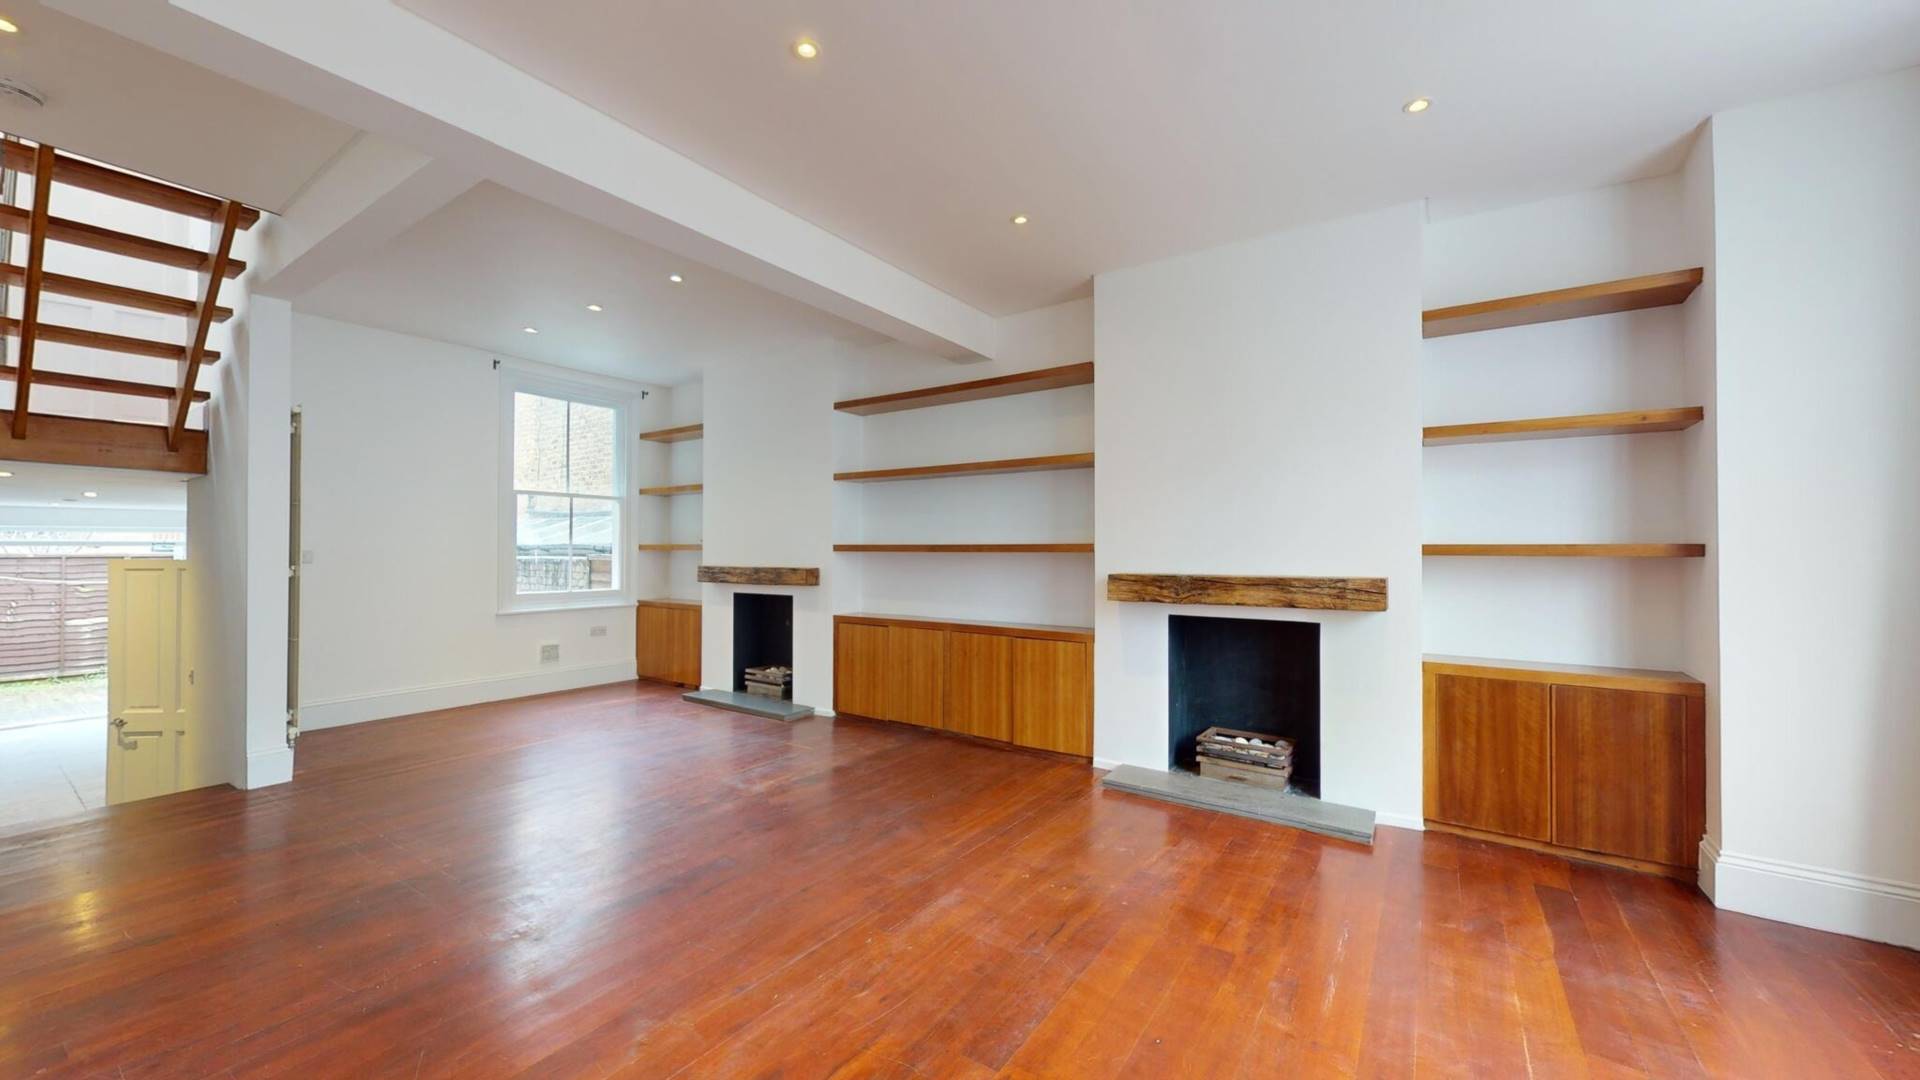 4 bed house, Fabian Road SW6, Image 1